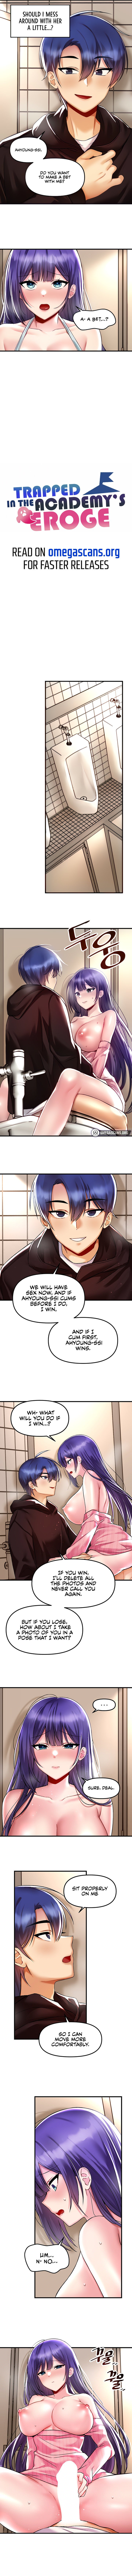 trapped-in-the-academys-eroge-chap-38-2